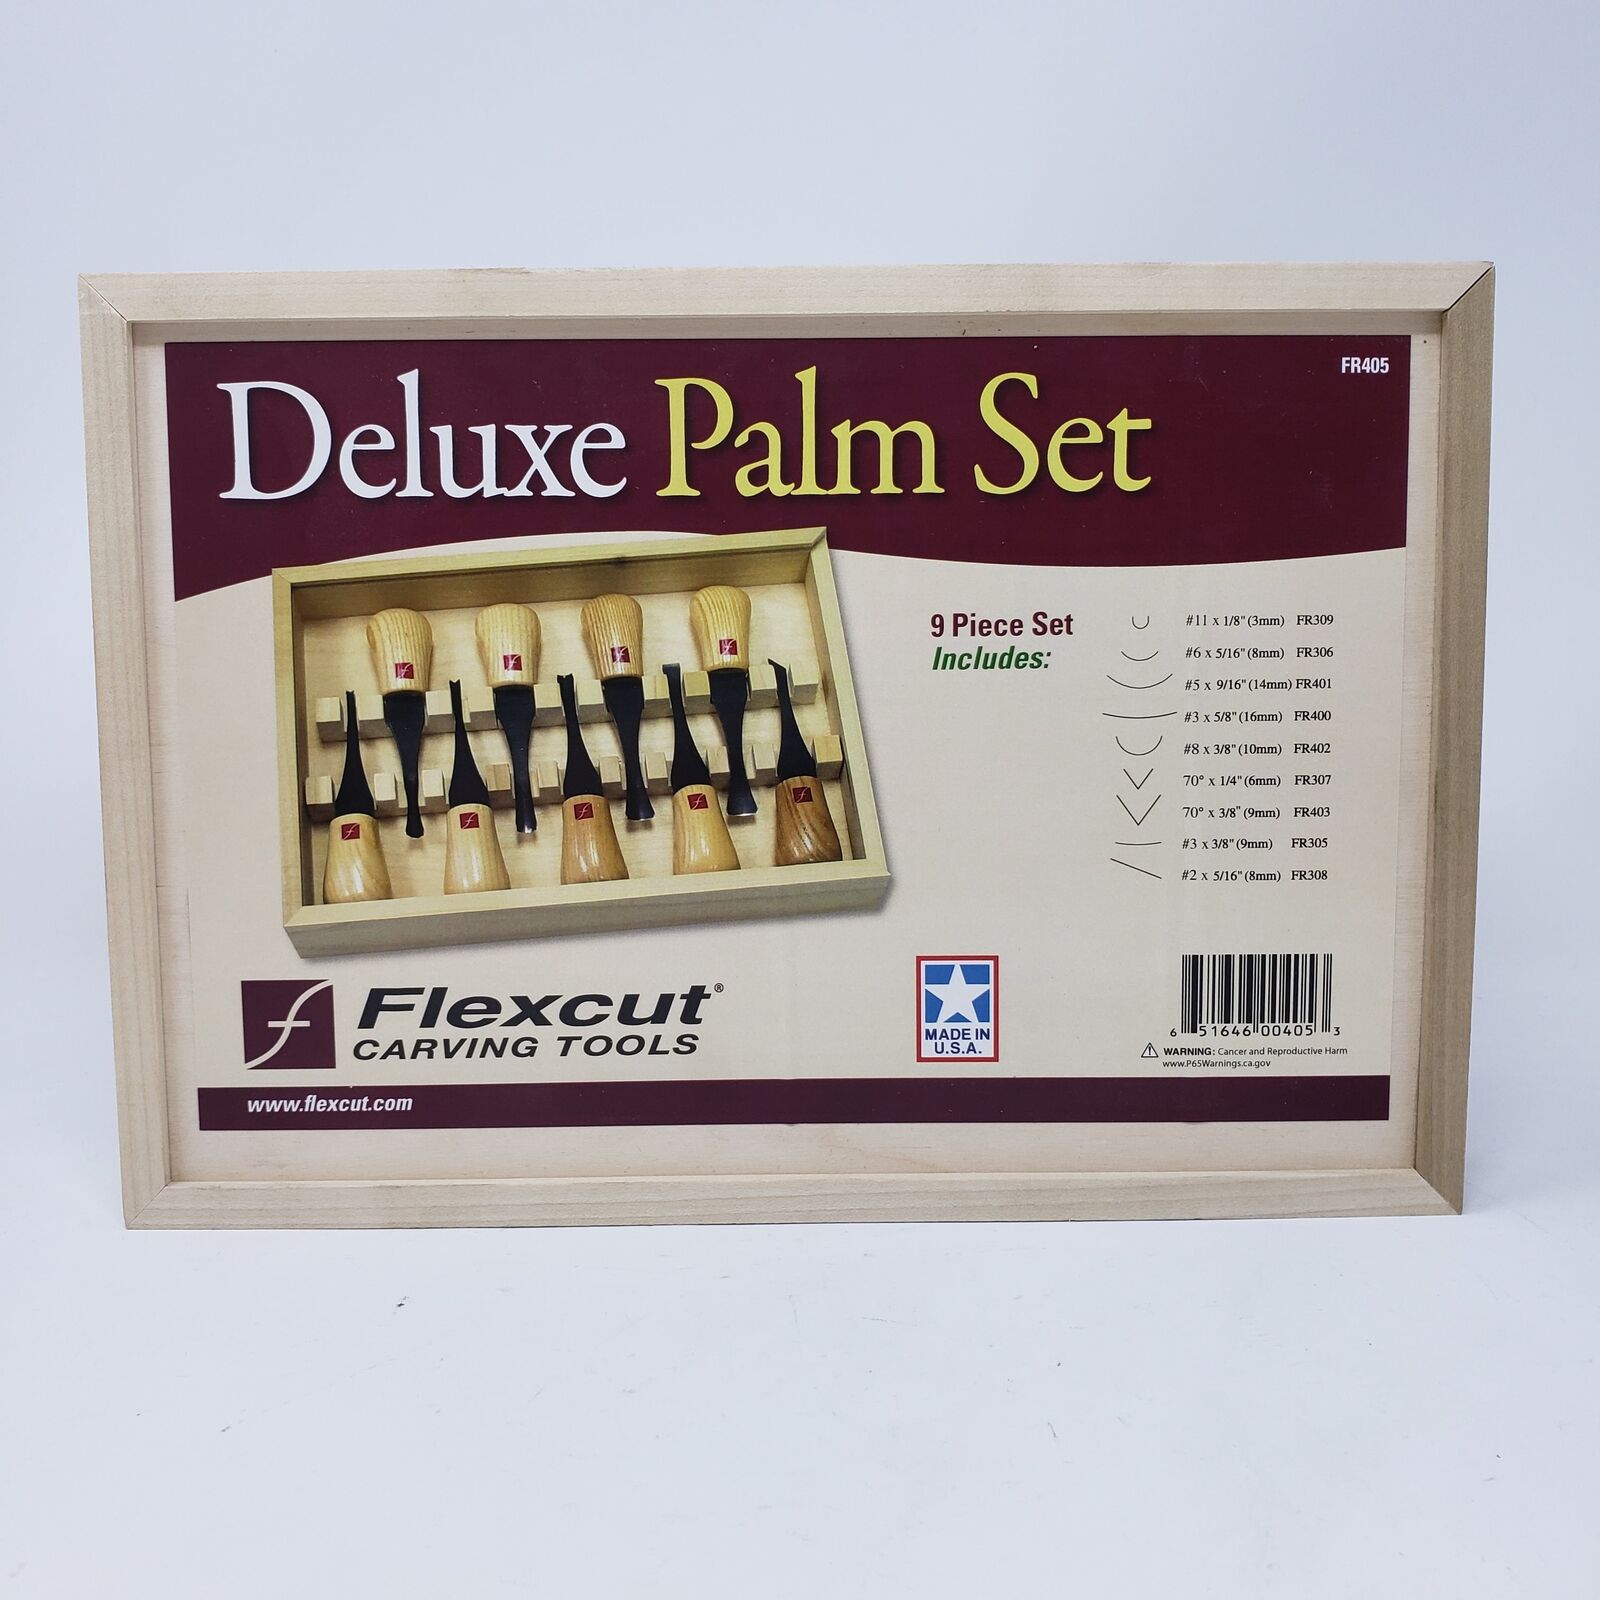 New Flexcut 9 Piece Deluxe Palm Set Carving Tools FR405